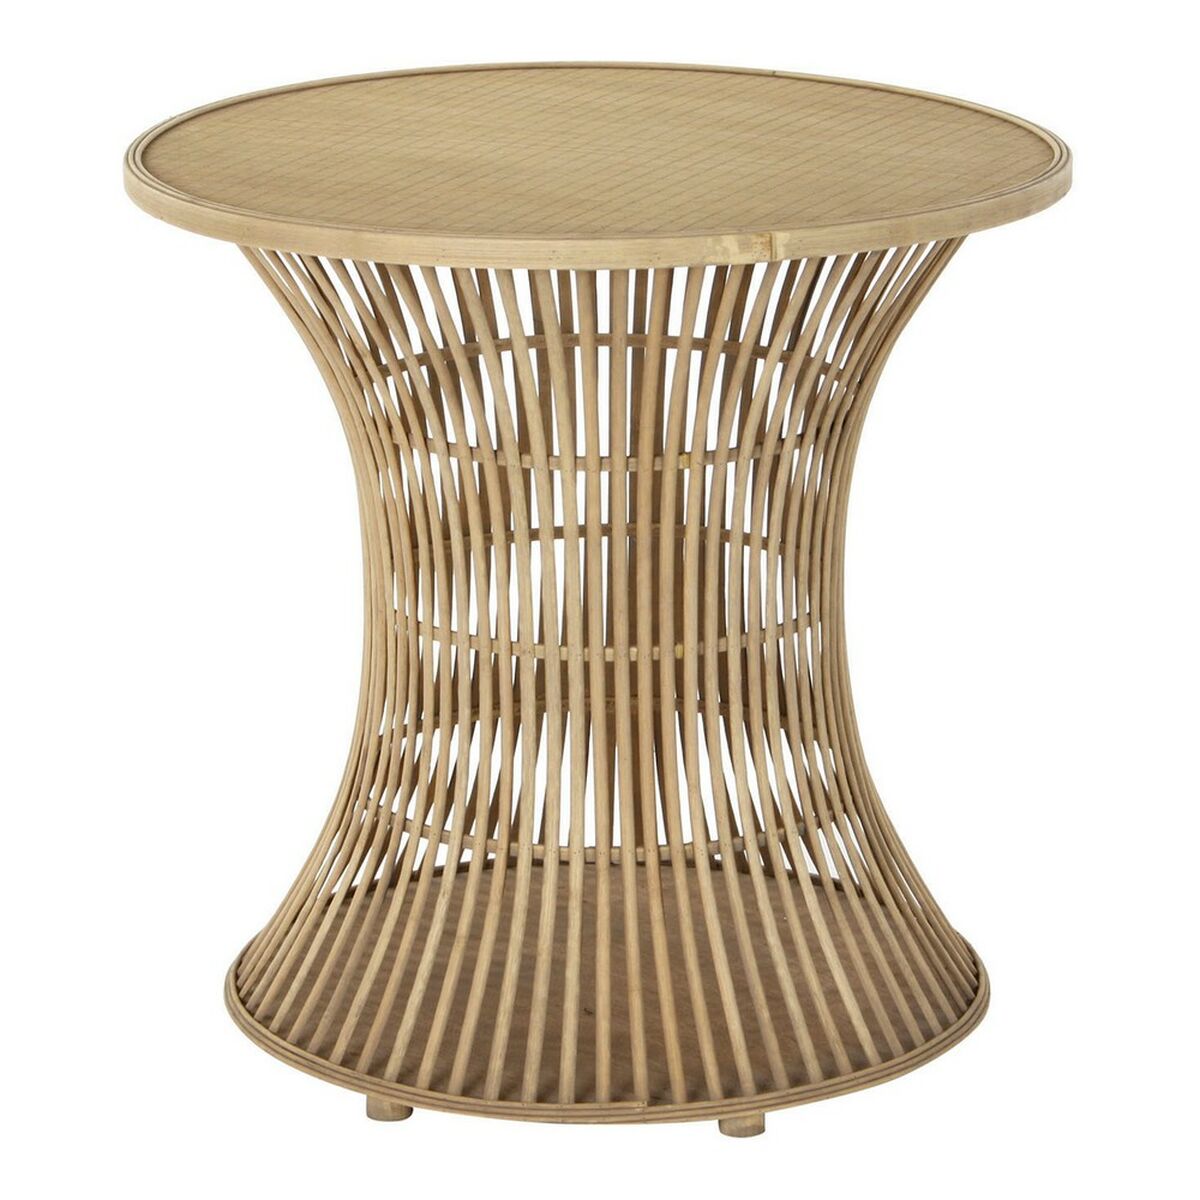 Table d'Appoint DKD Home Decor Rotin (60.5 x 60.5 x 60 cm)